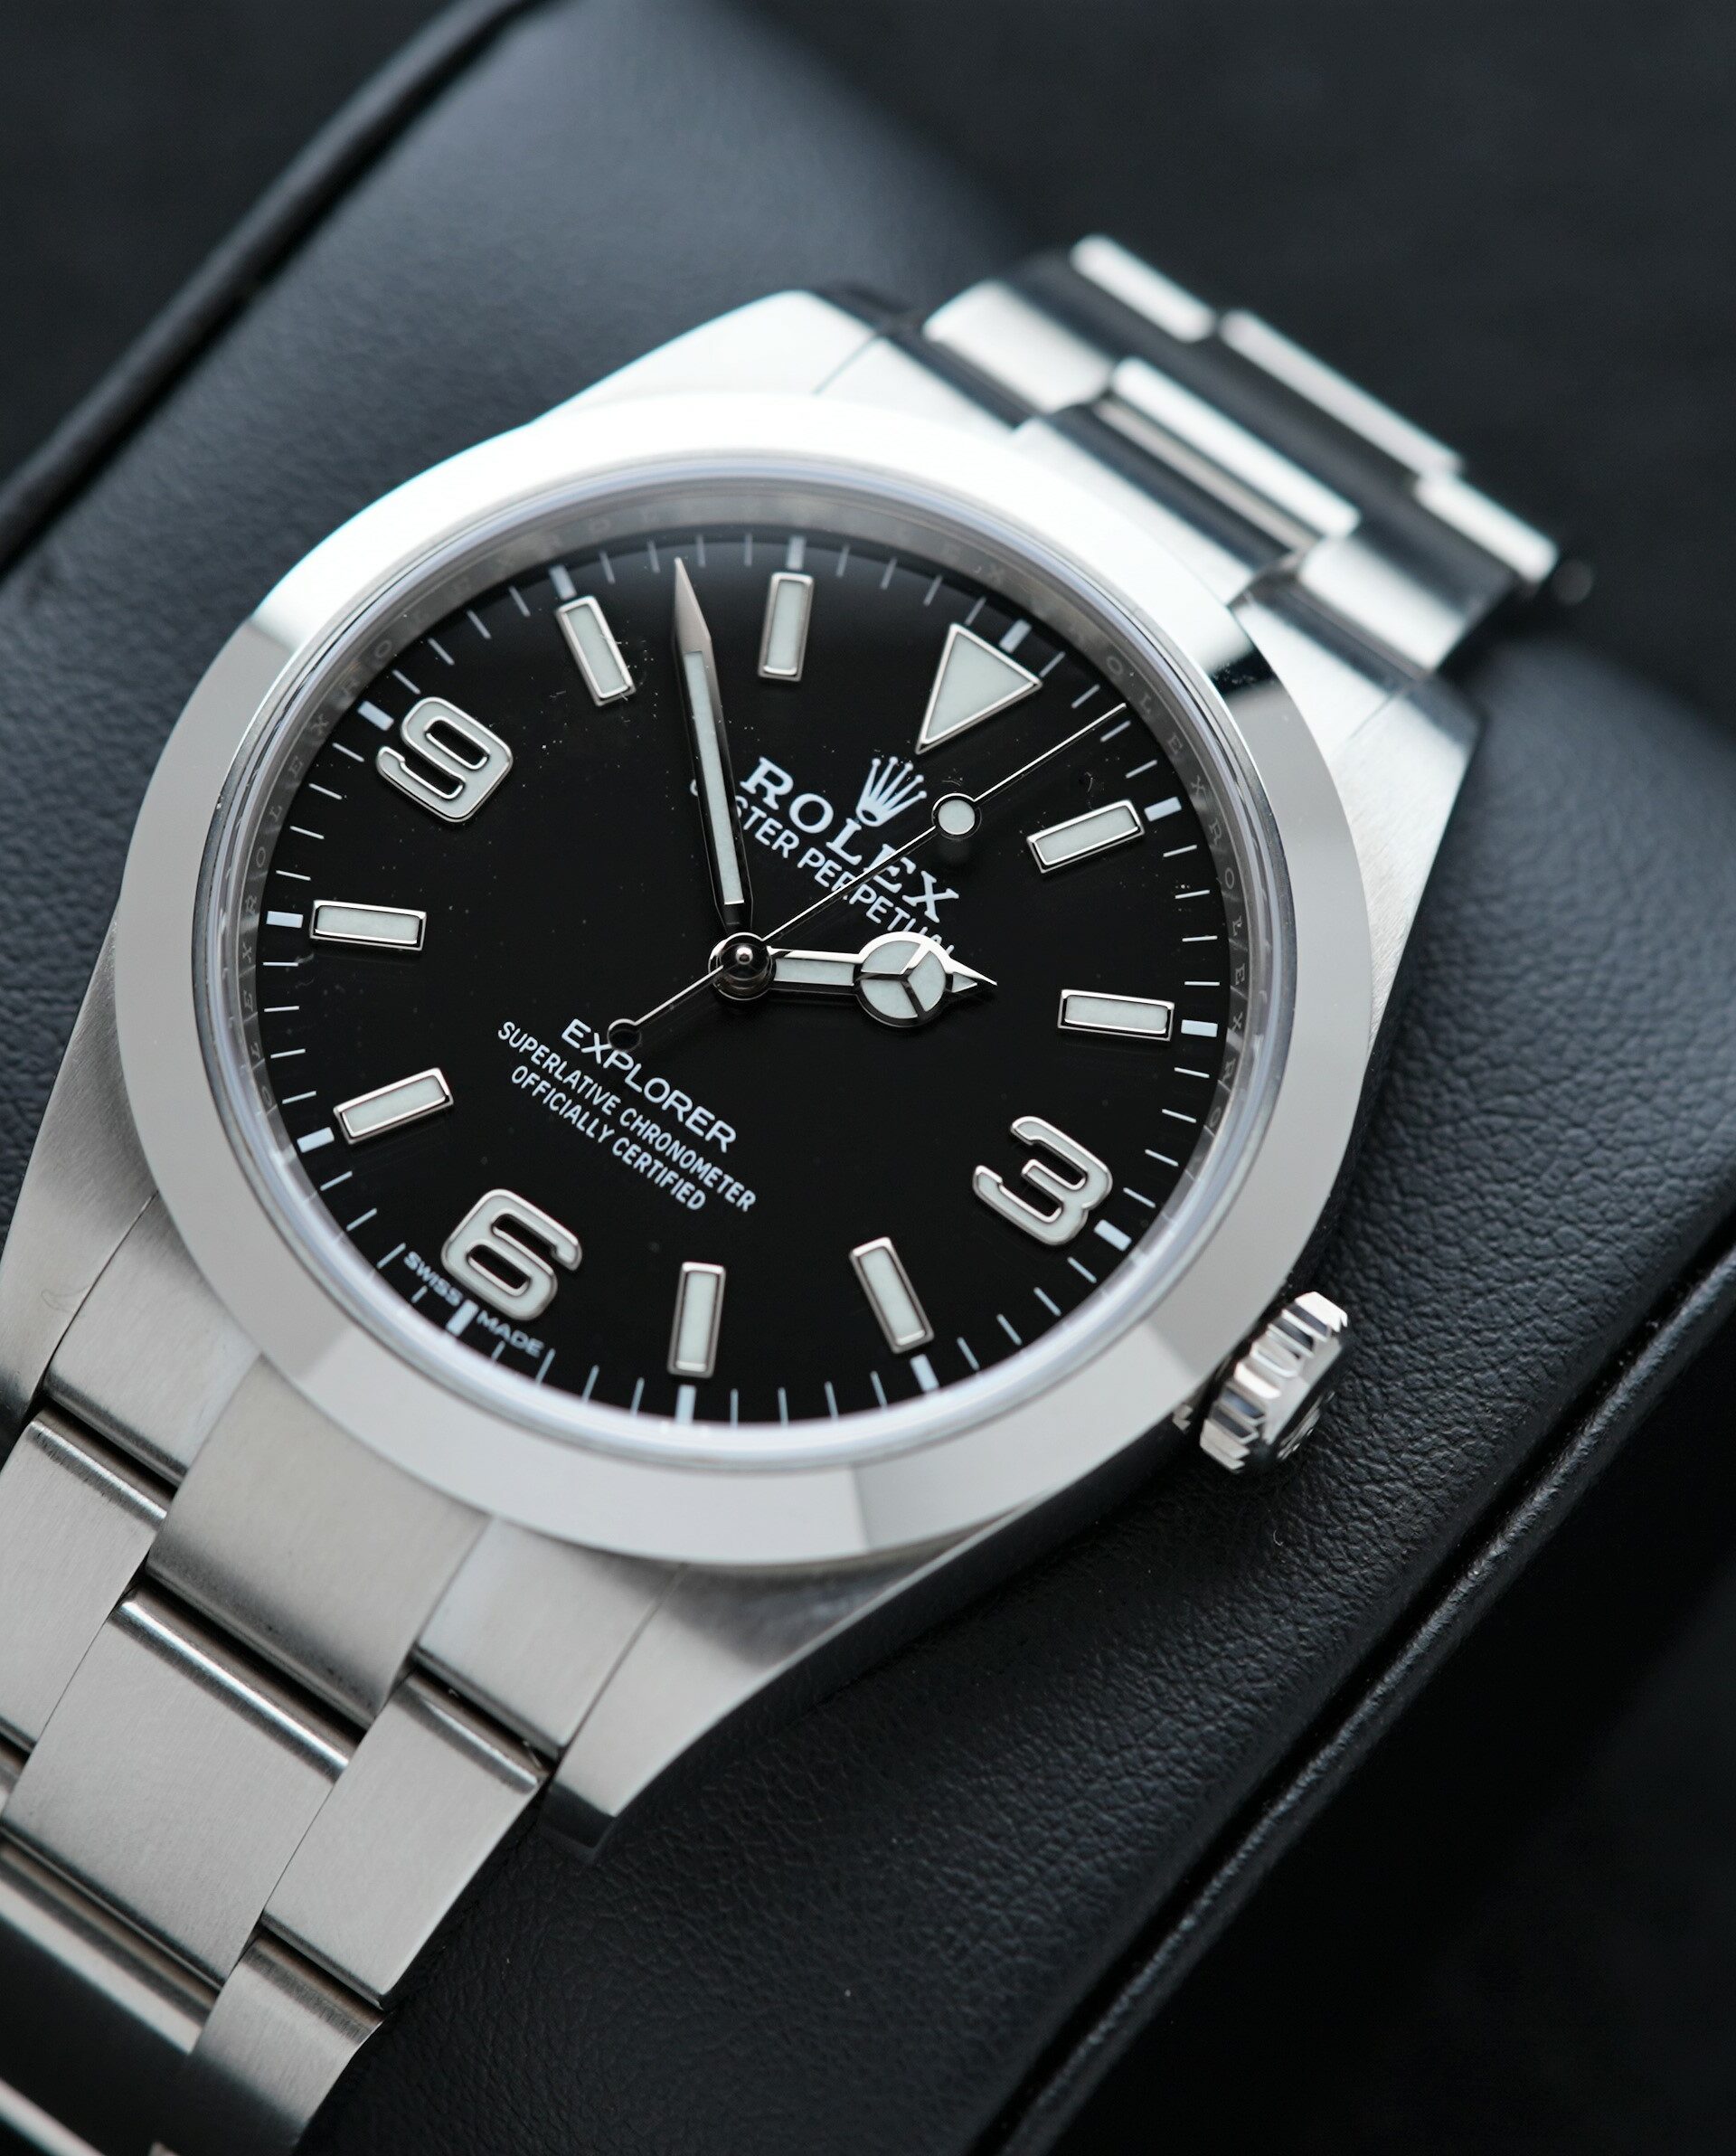 Rolex Explorer 214270 39mm watch featured on an angle.